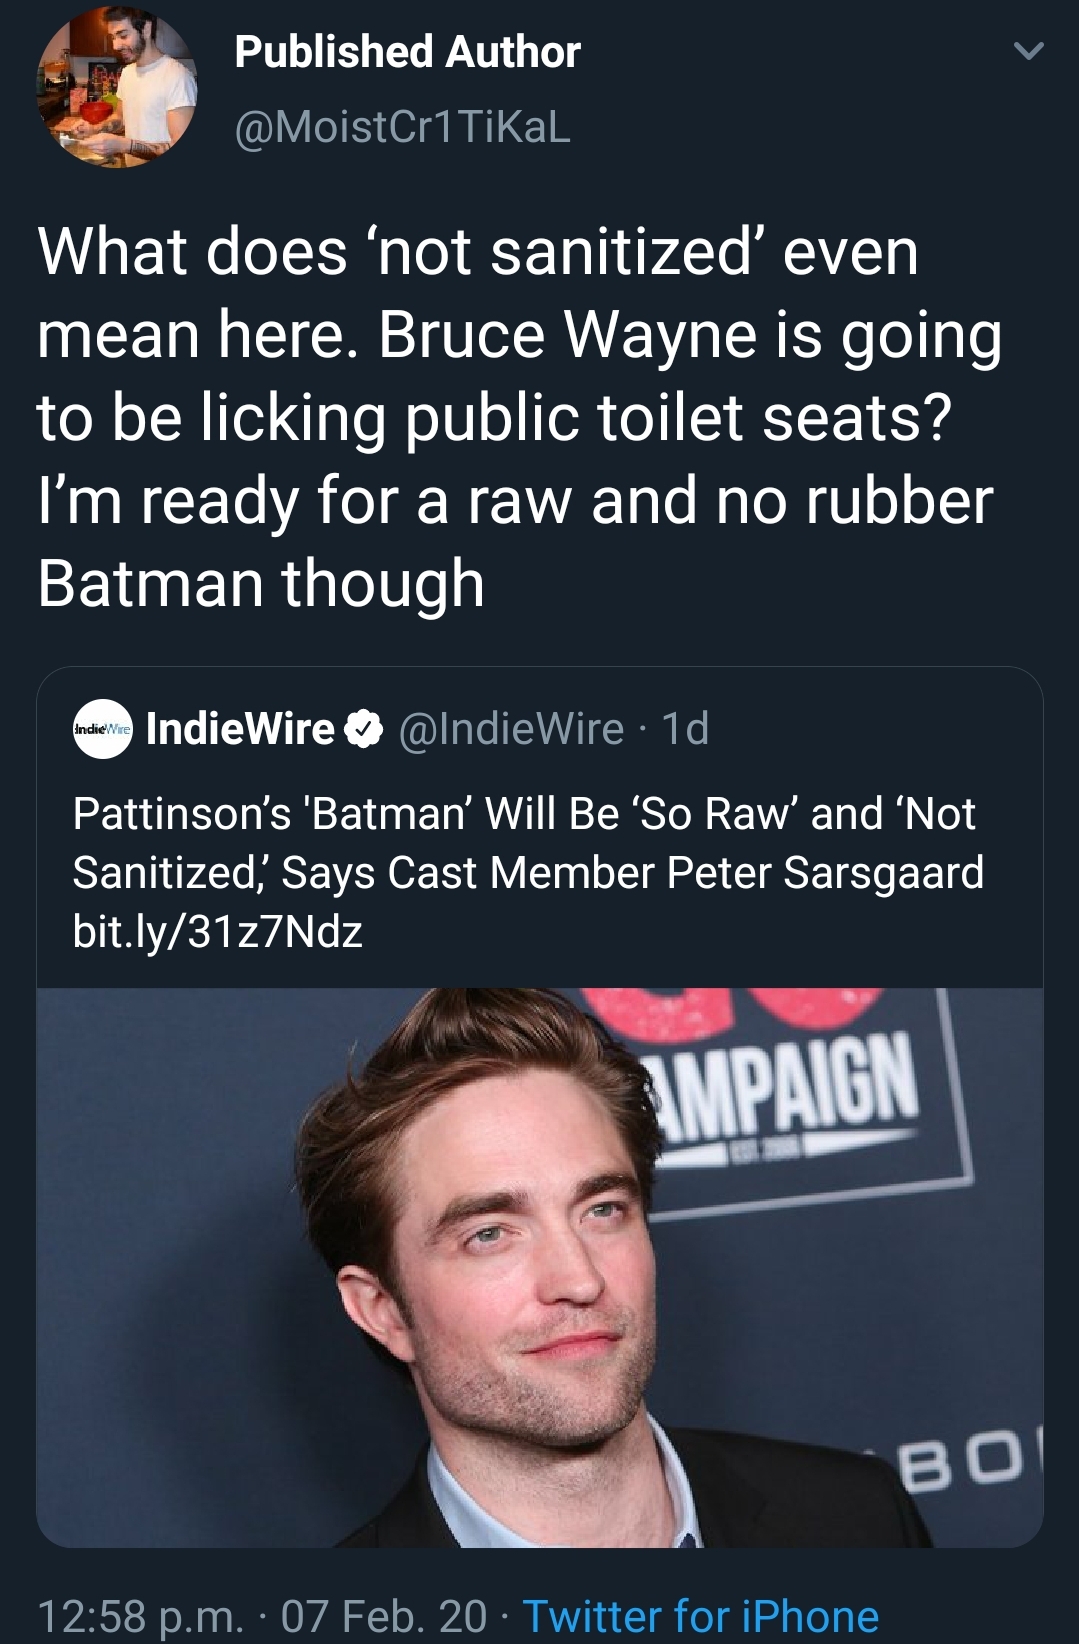 haste the day - Published Author Tikal What does 'not sanitized even mean here. Bruce Wayne is going to be licking public toilet seats? I'm ready for a raw and no rubber Batman though IndieWire Wire Td Pattinson's 'Batman' Will Be 'So Raw' and 'Not Saniti